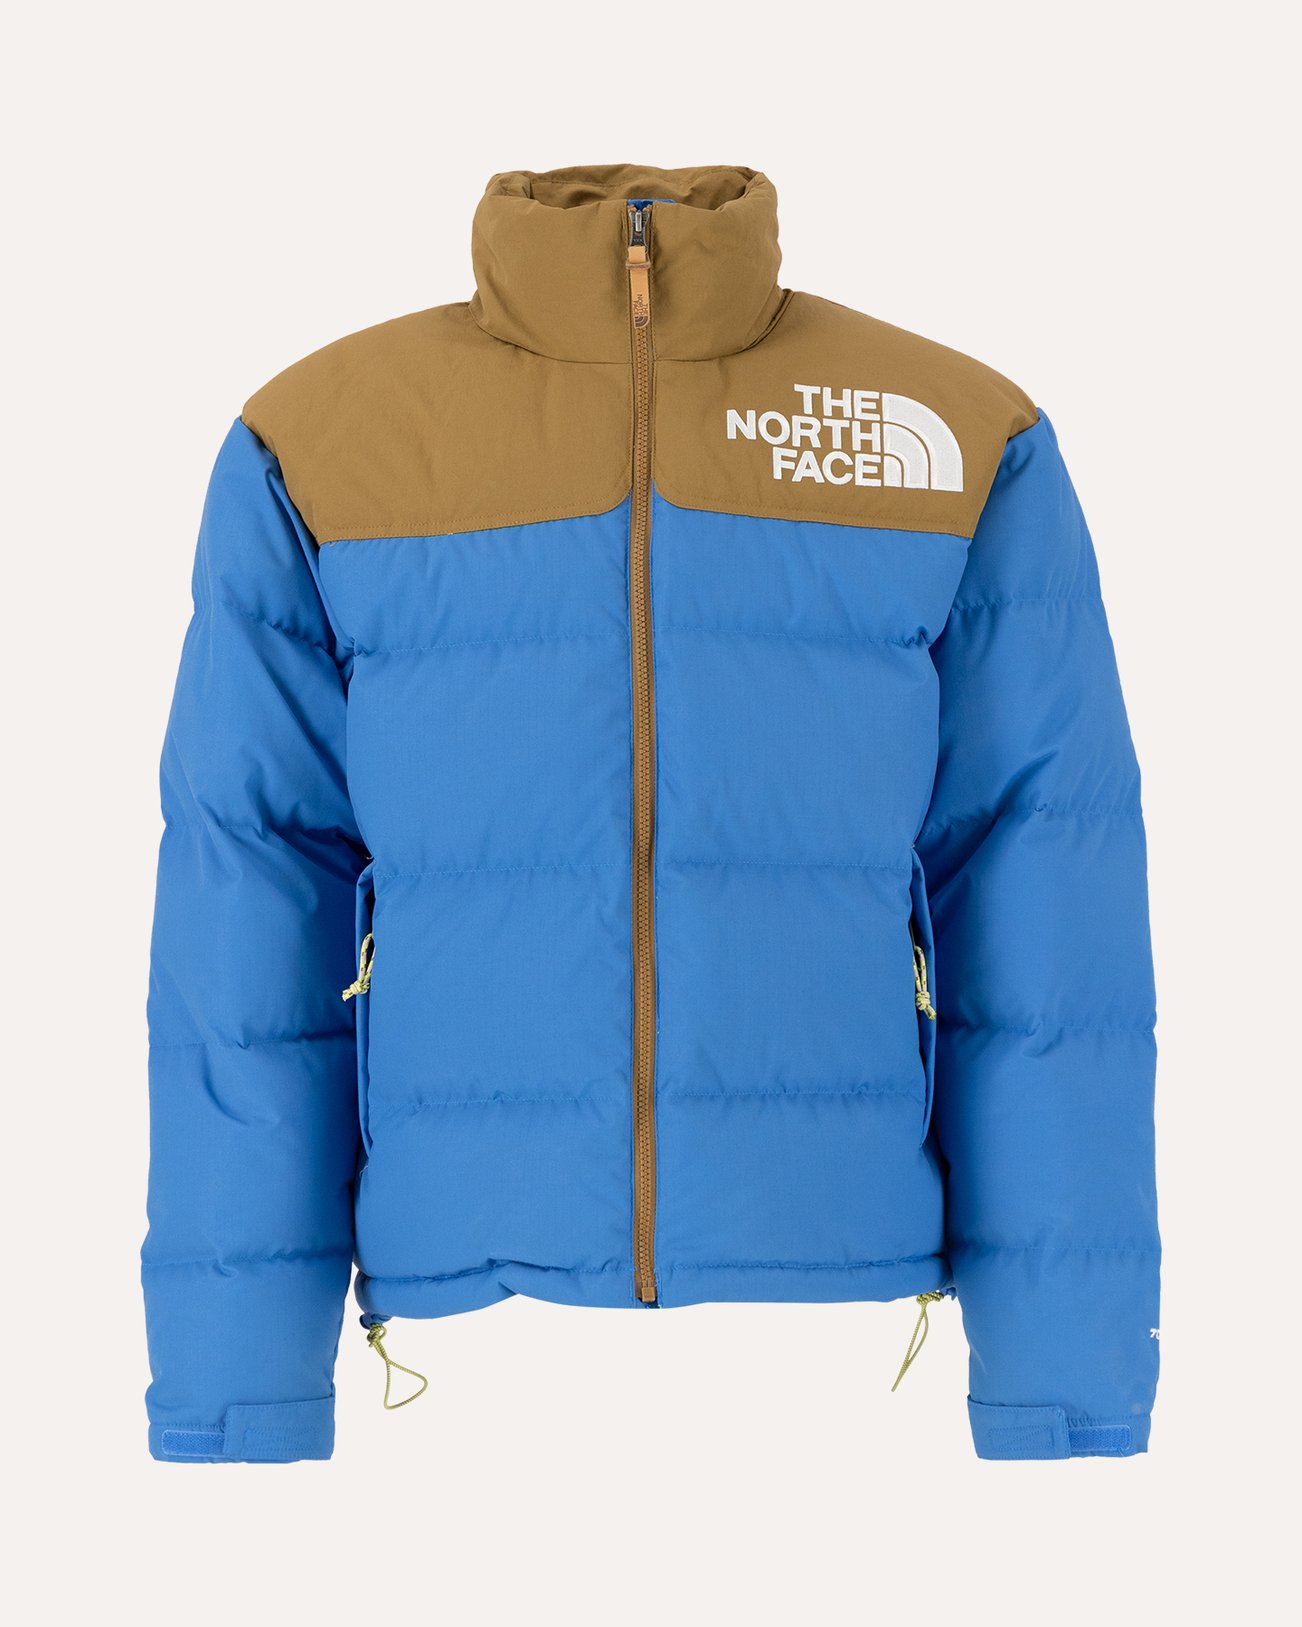 Email schrijven ondernemer Hover The North Face | Coef Men